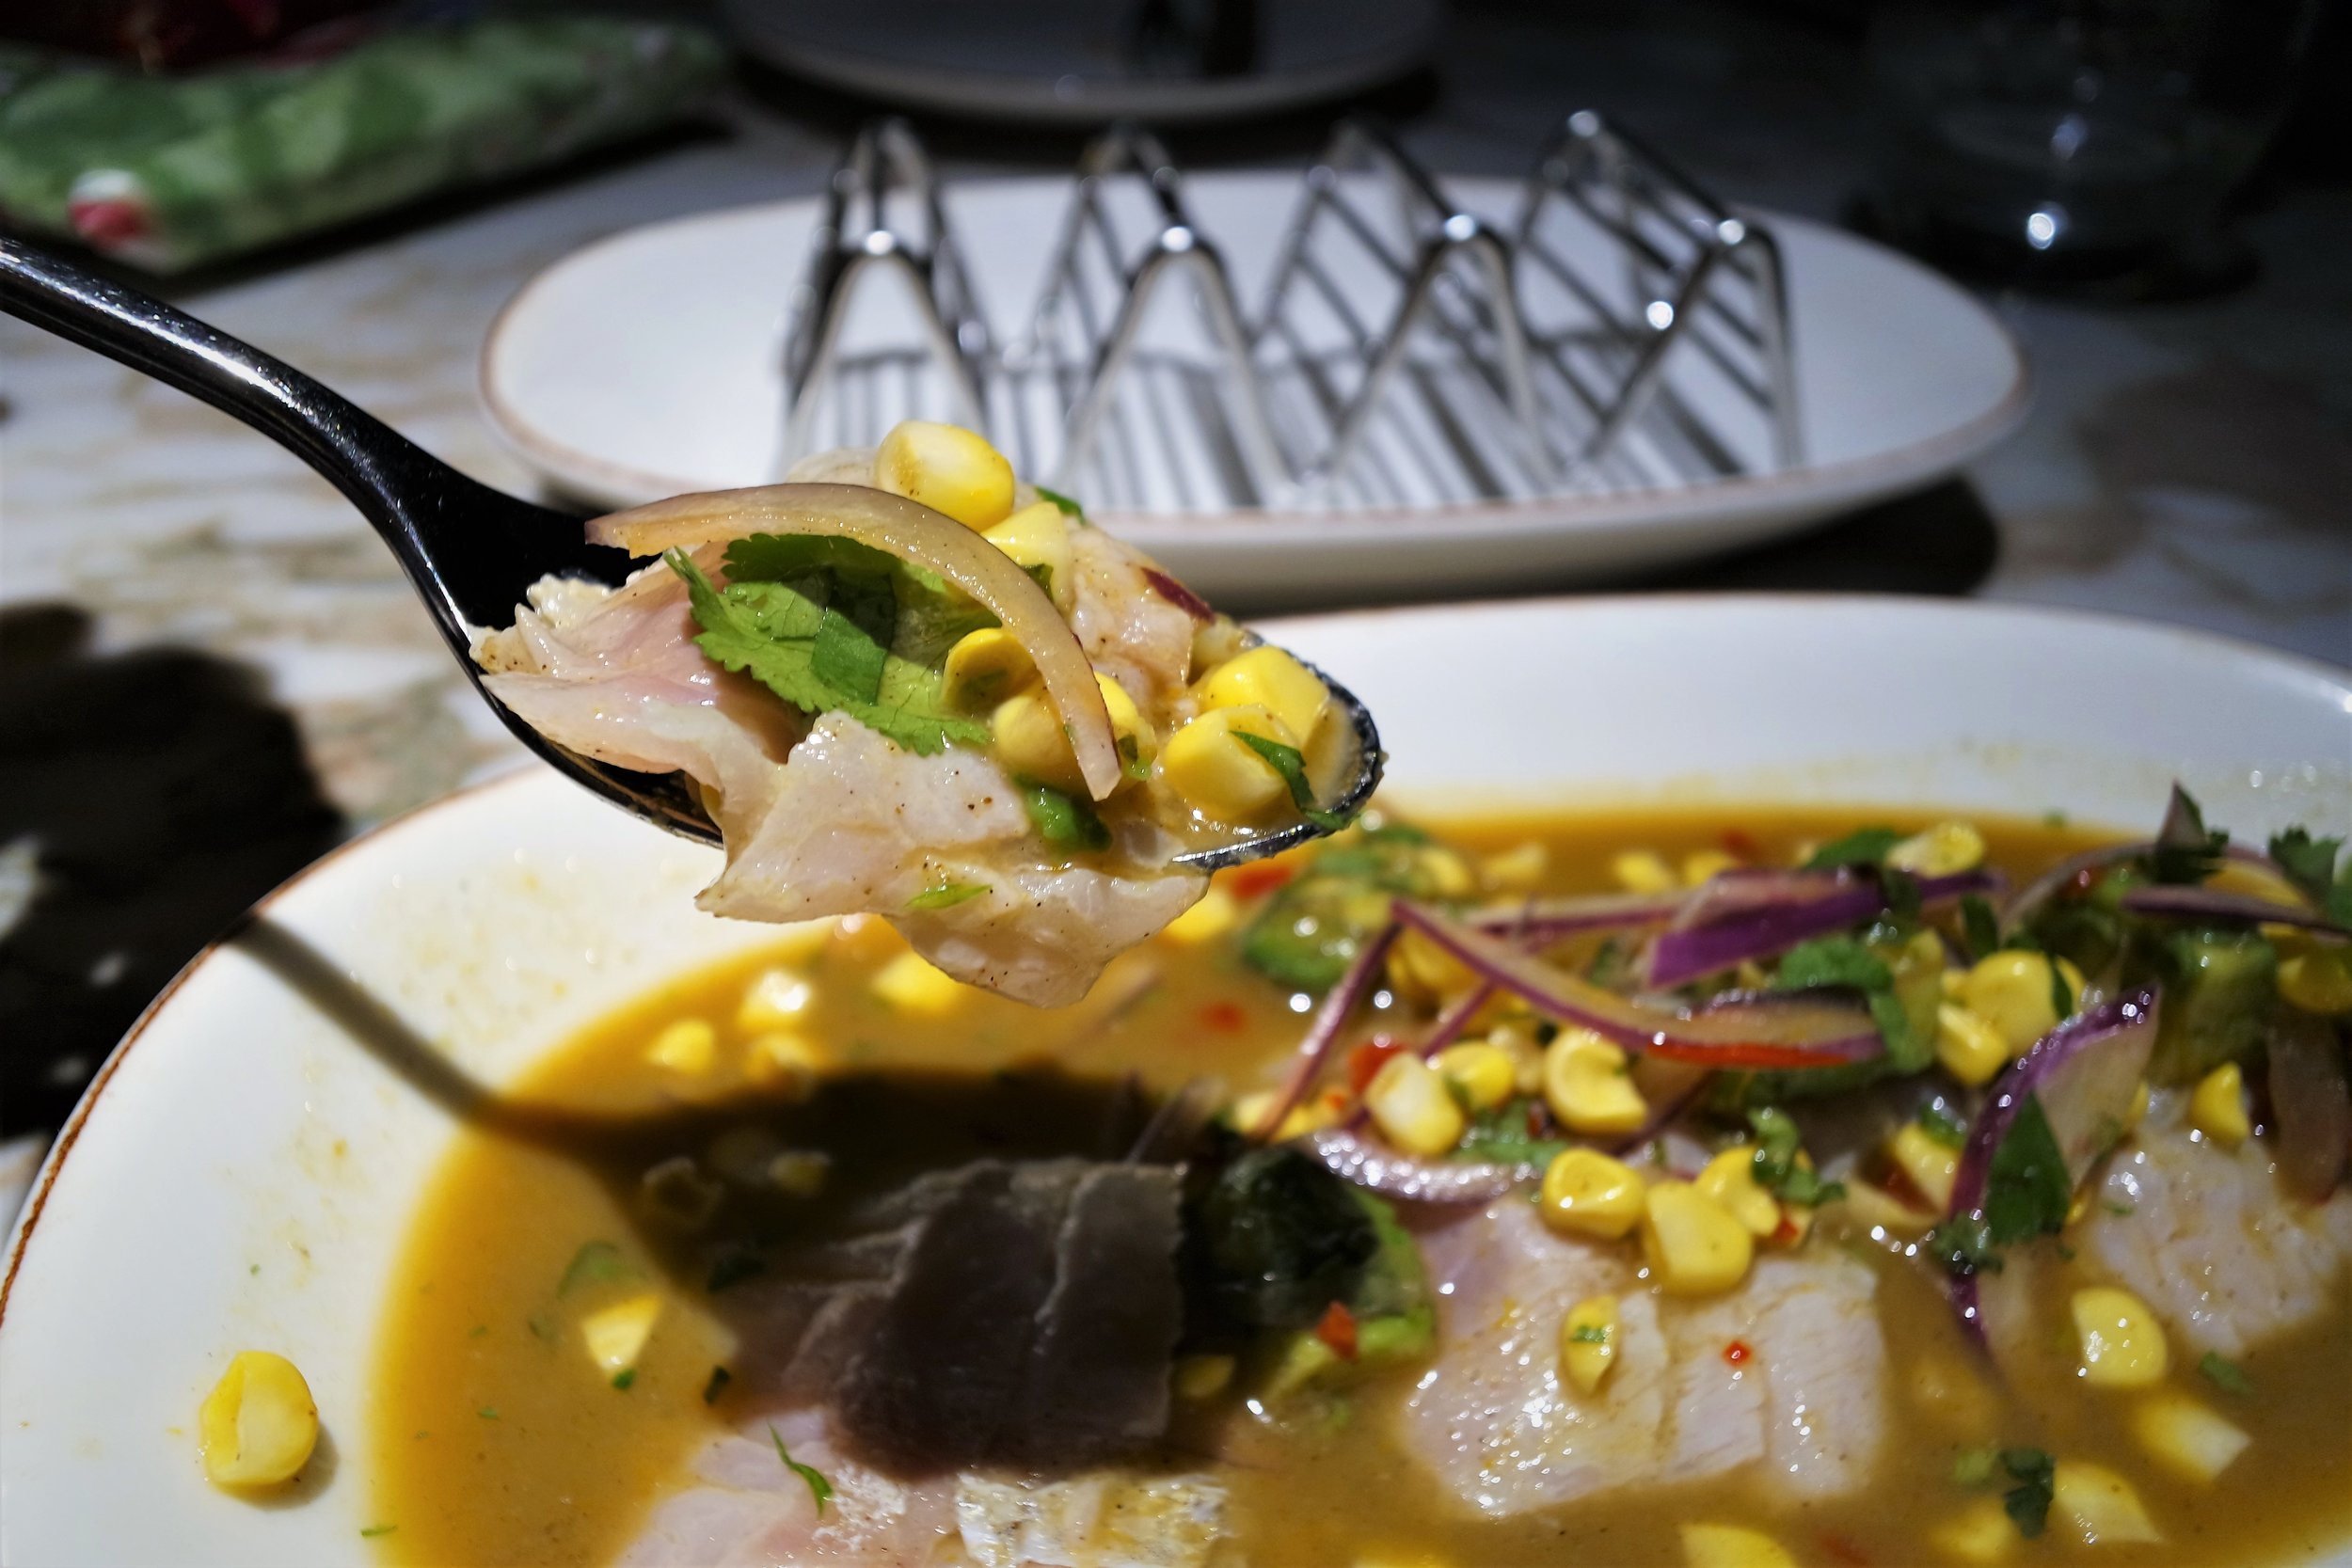 Seabass Ceviche with Avocado, White Corn and Red Onion (£11.00)